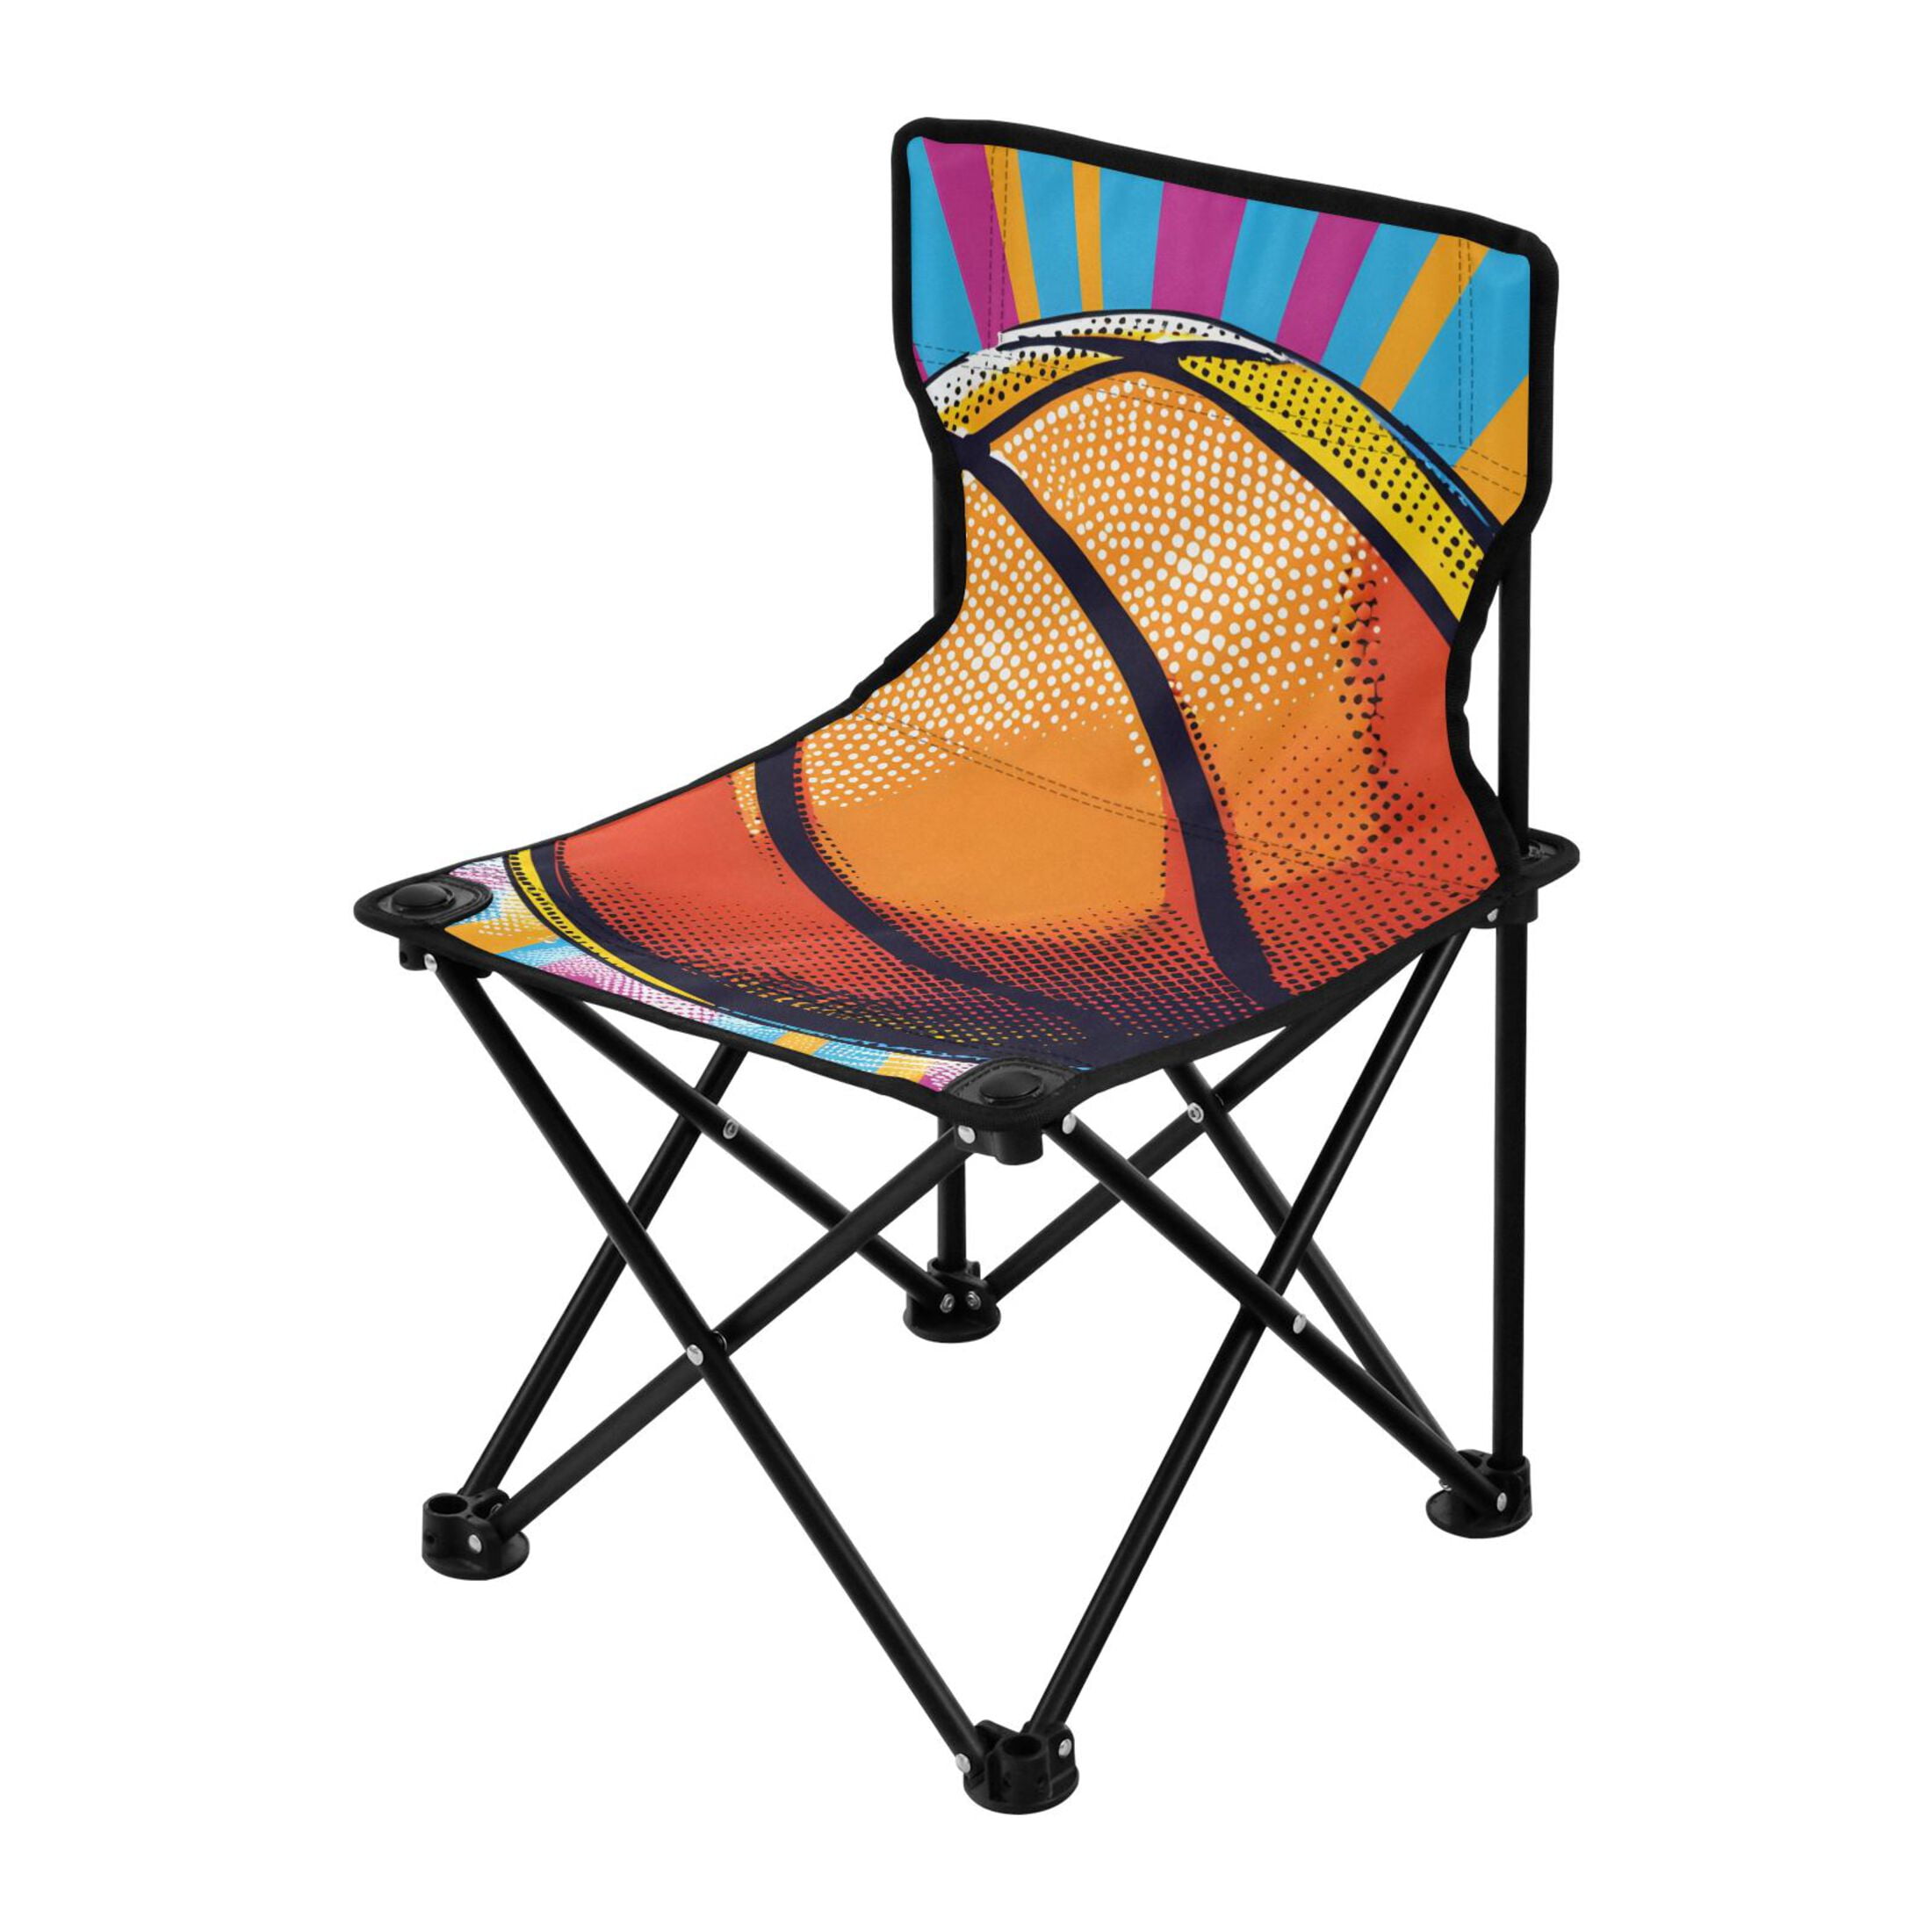 Basketball and Rainbow Portable Camping Chair Outdoor Folding Beach Chair  Fishing Chair Lawn Chair with Carry Bag Support to 220LBS 